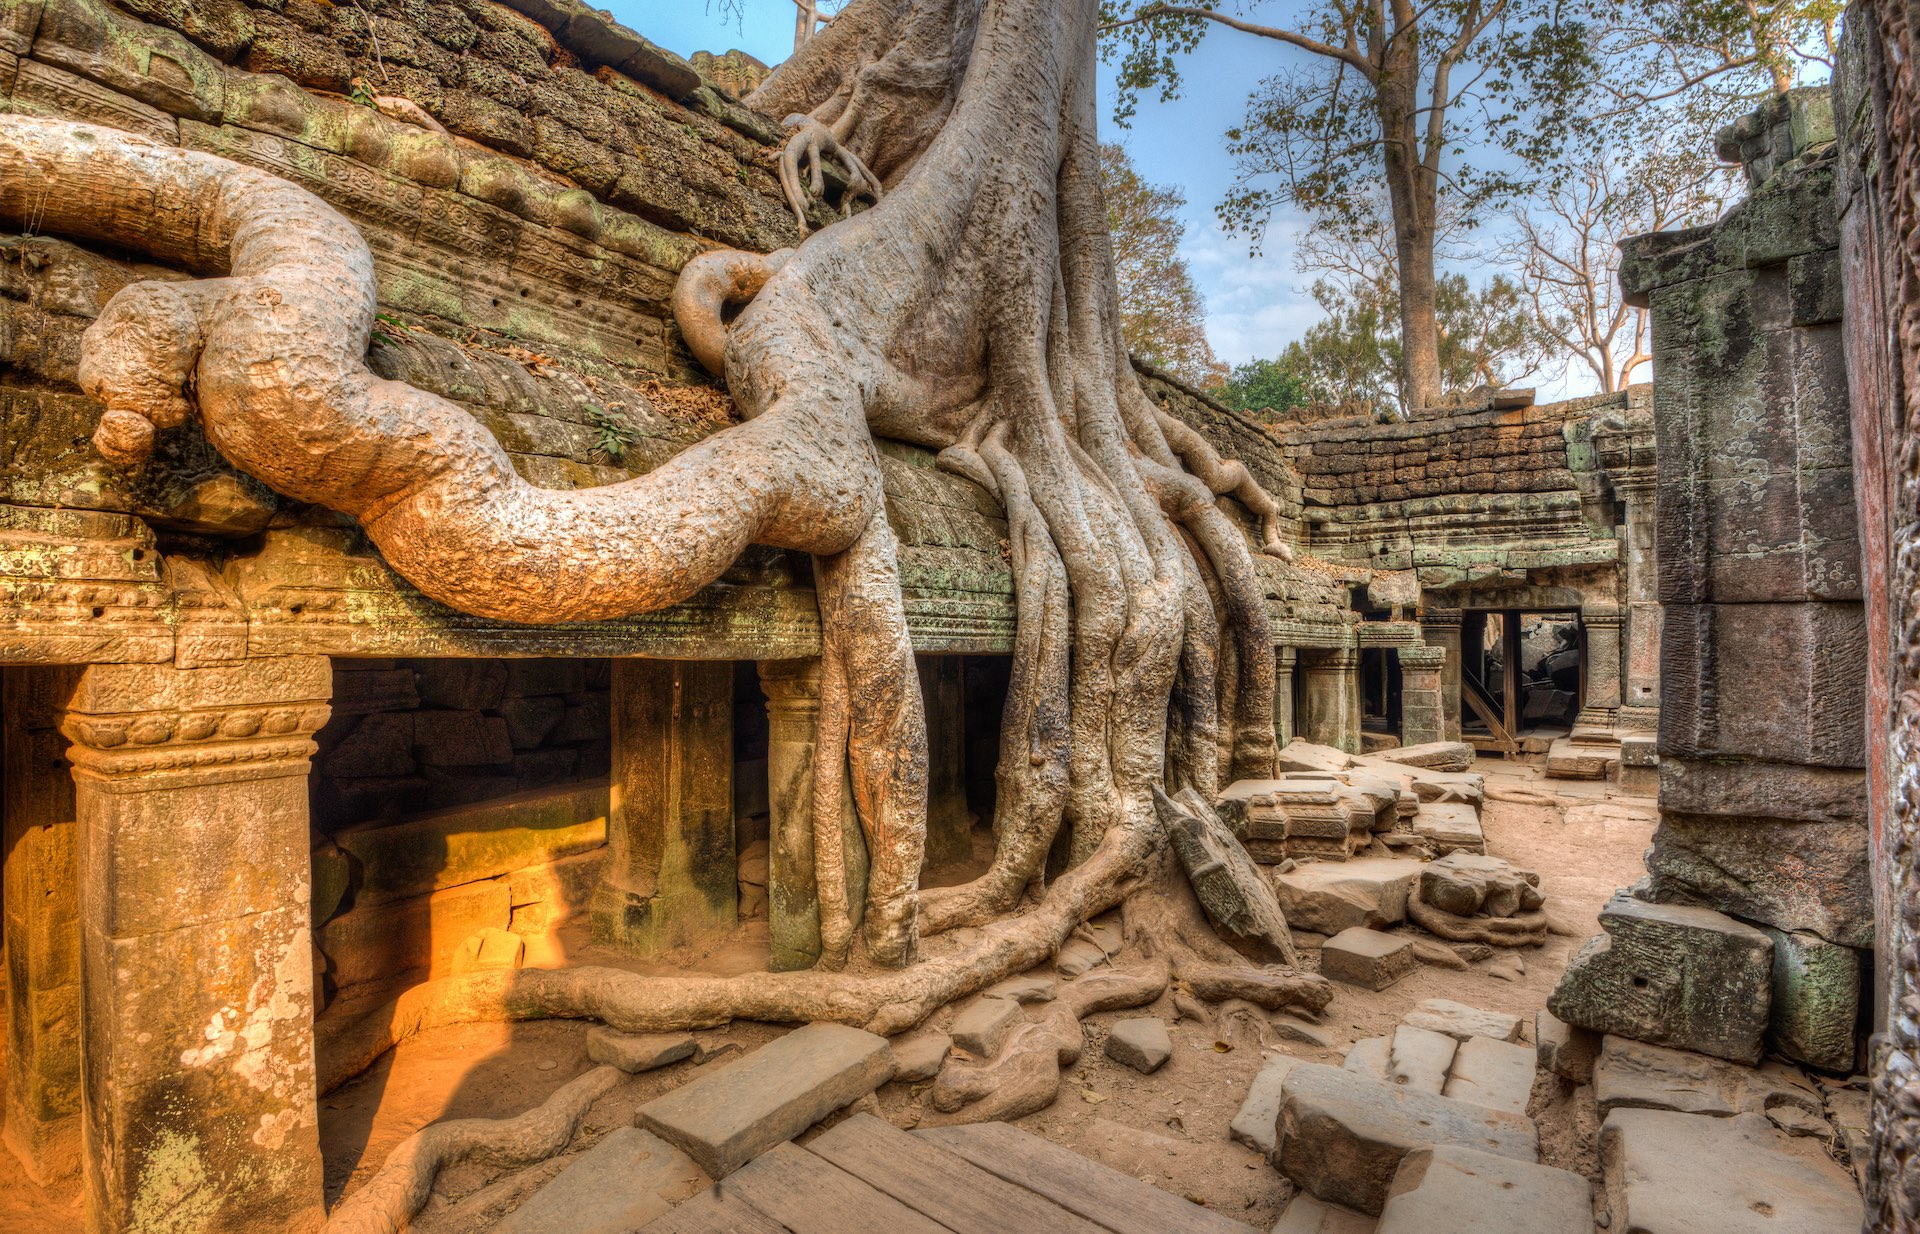 Ta Prohm features overgrown trees and roots intertwining with the temple ruins